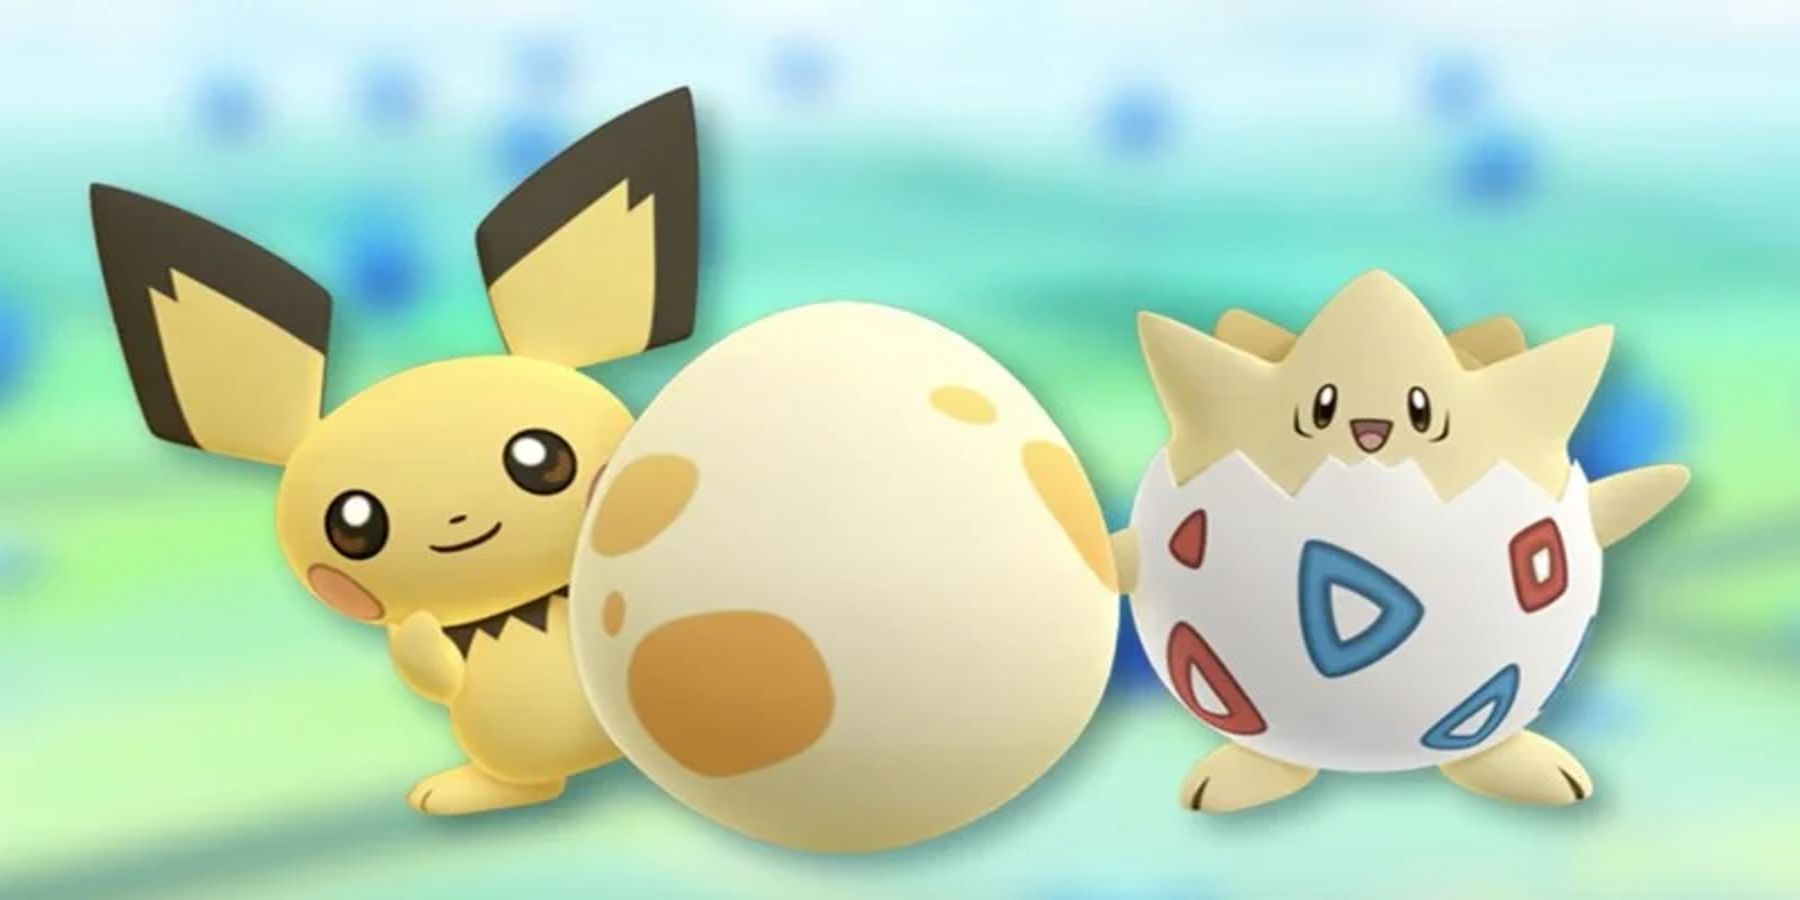 Pokemon GO Introducing eggs, celebrating with Pichu and Togepi